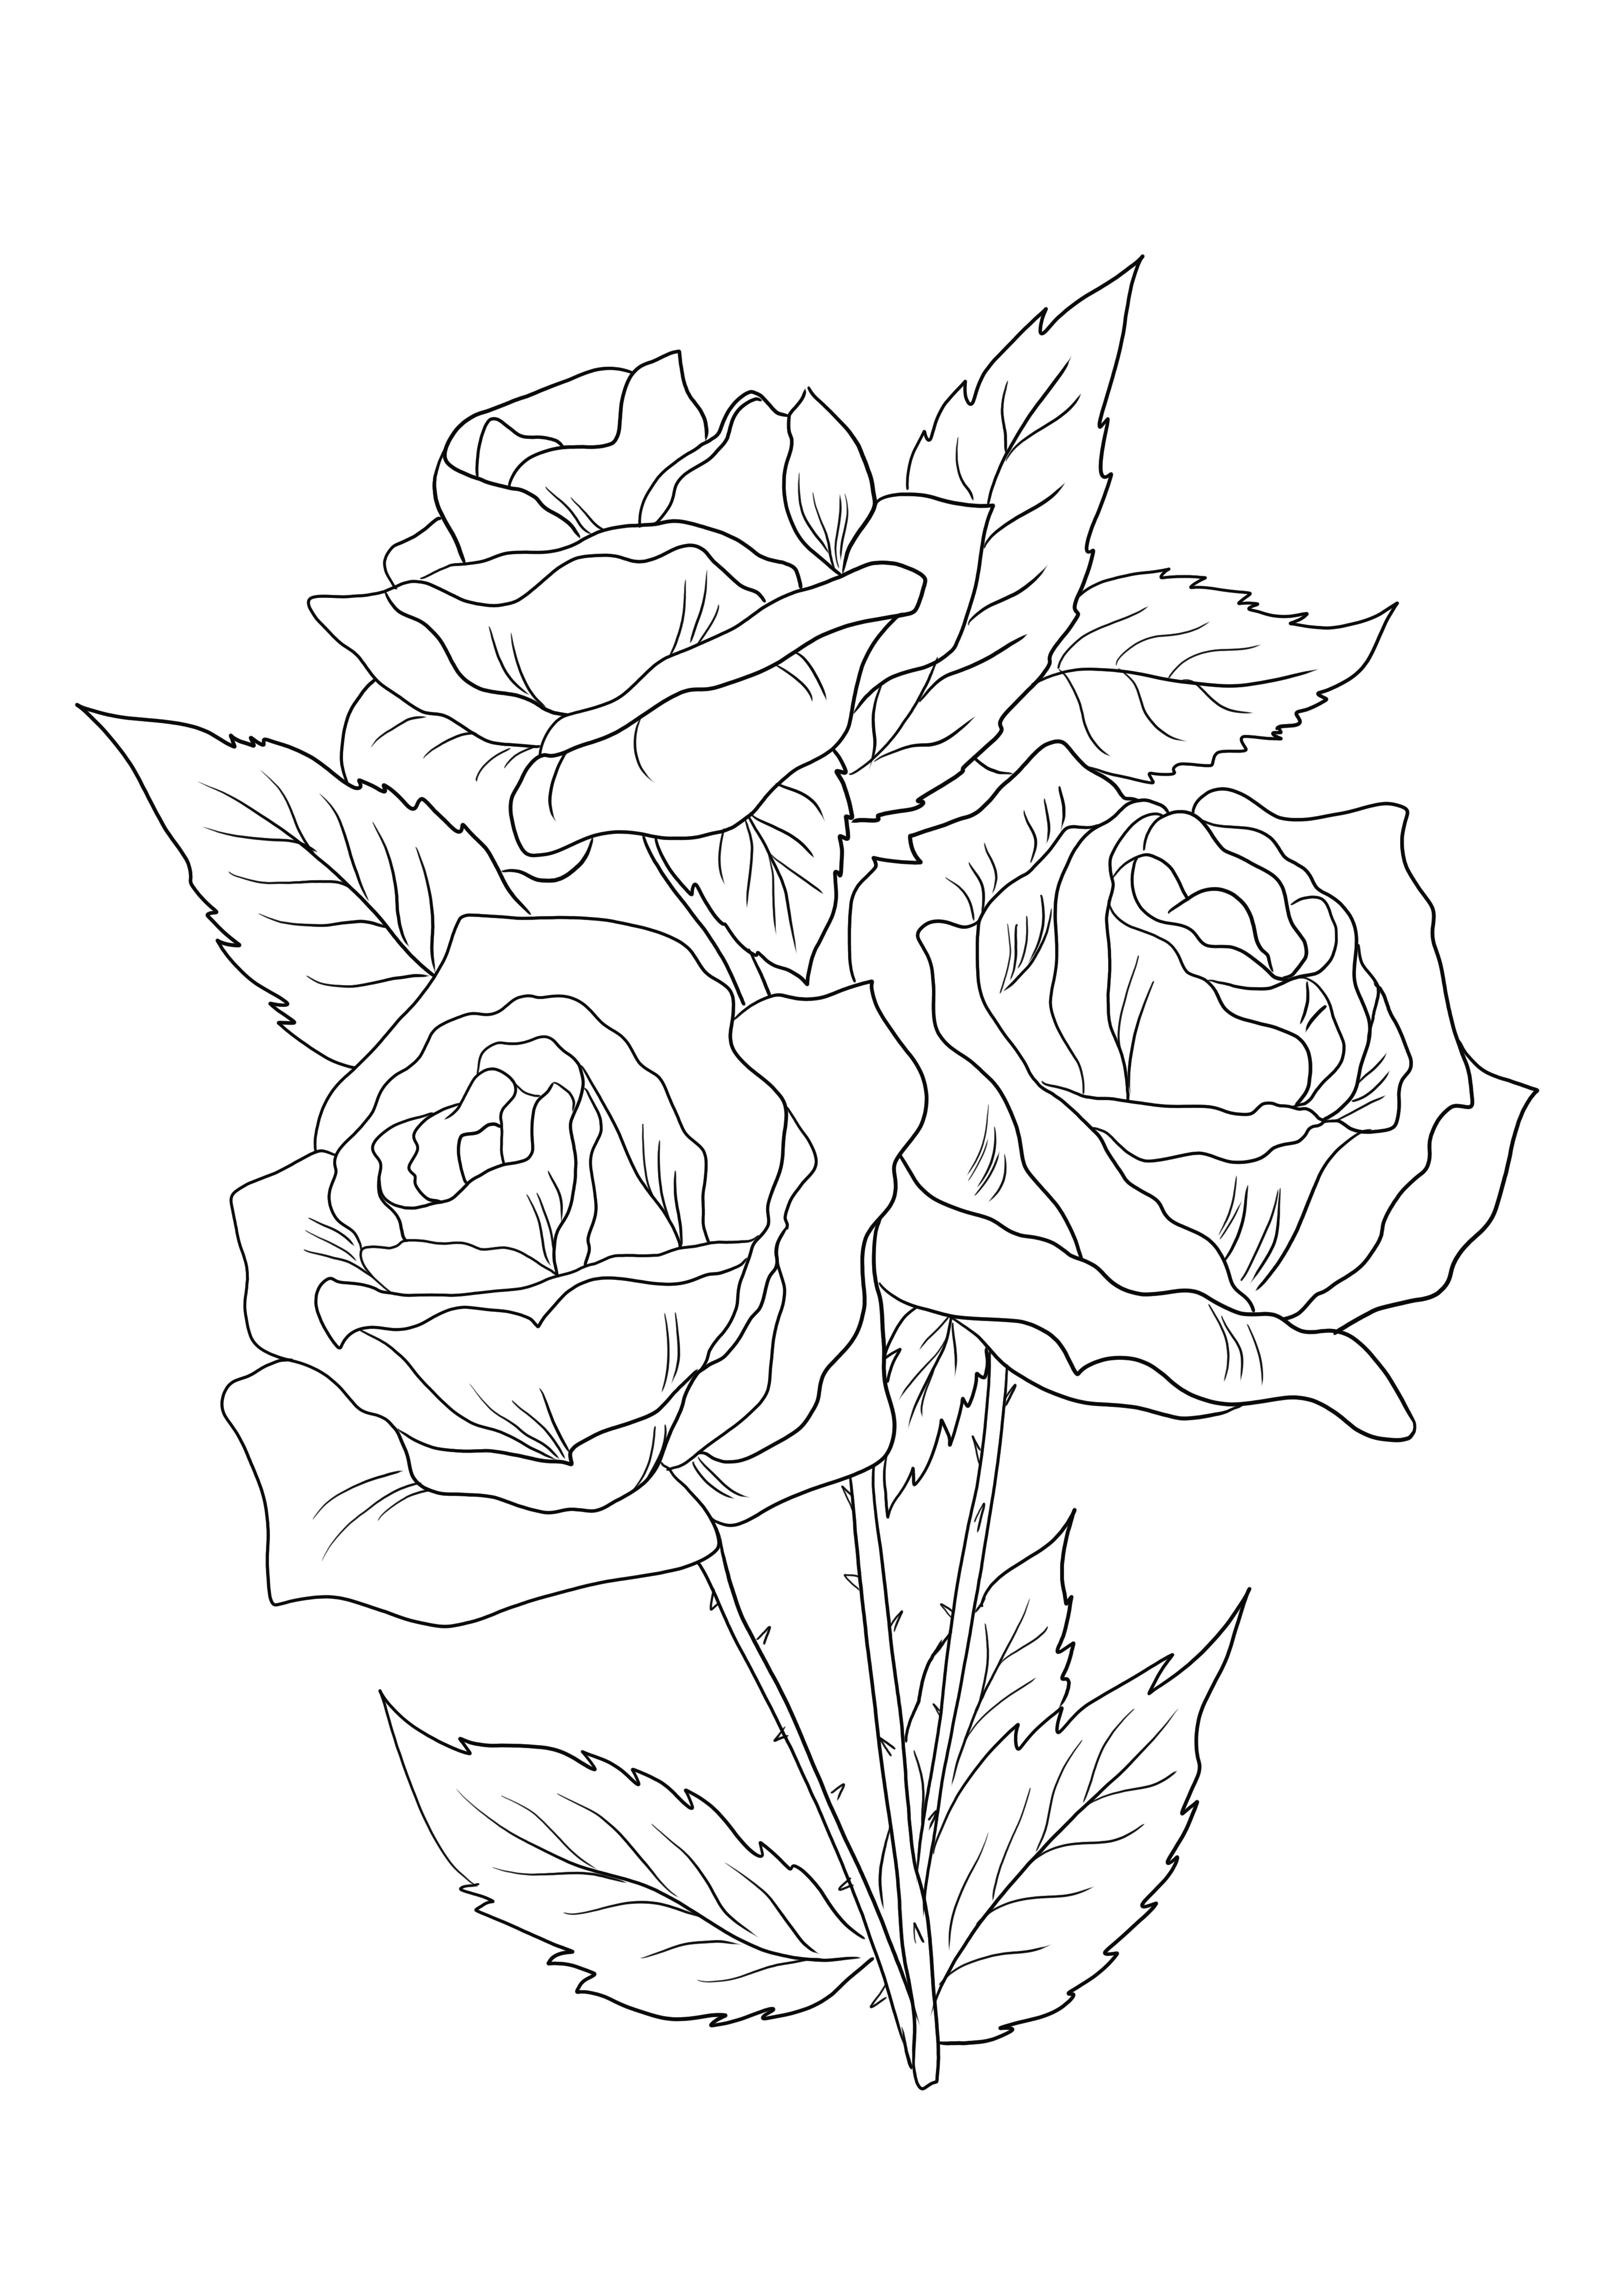 Three roses in bloom are to be downloaded and colored for free and learn about flowers